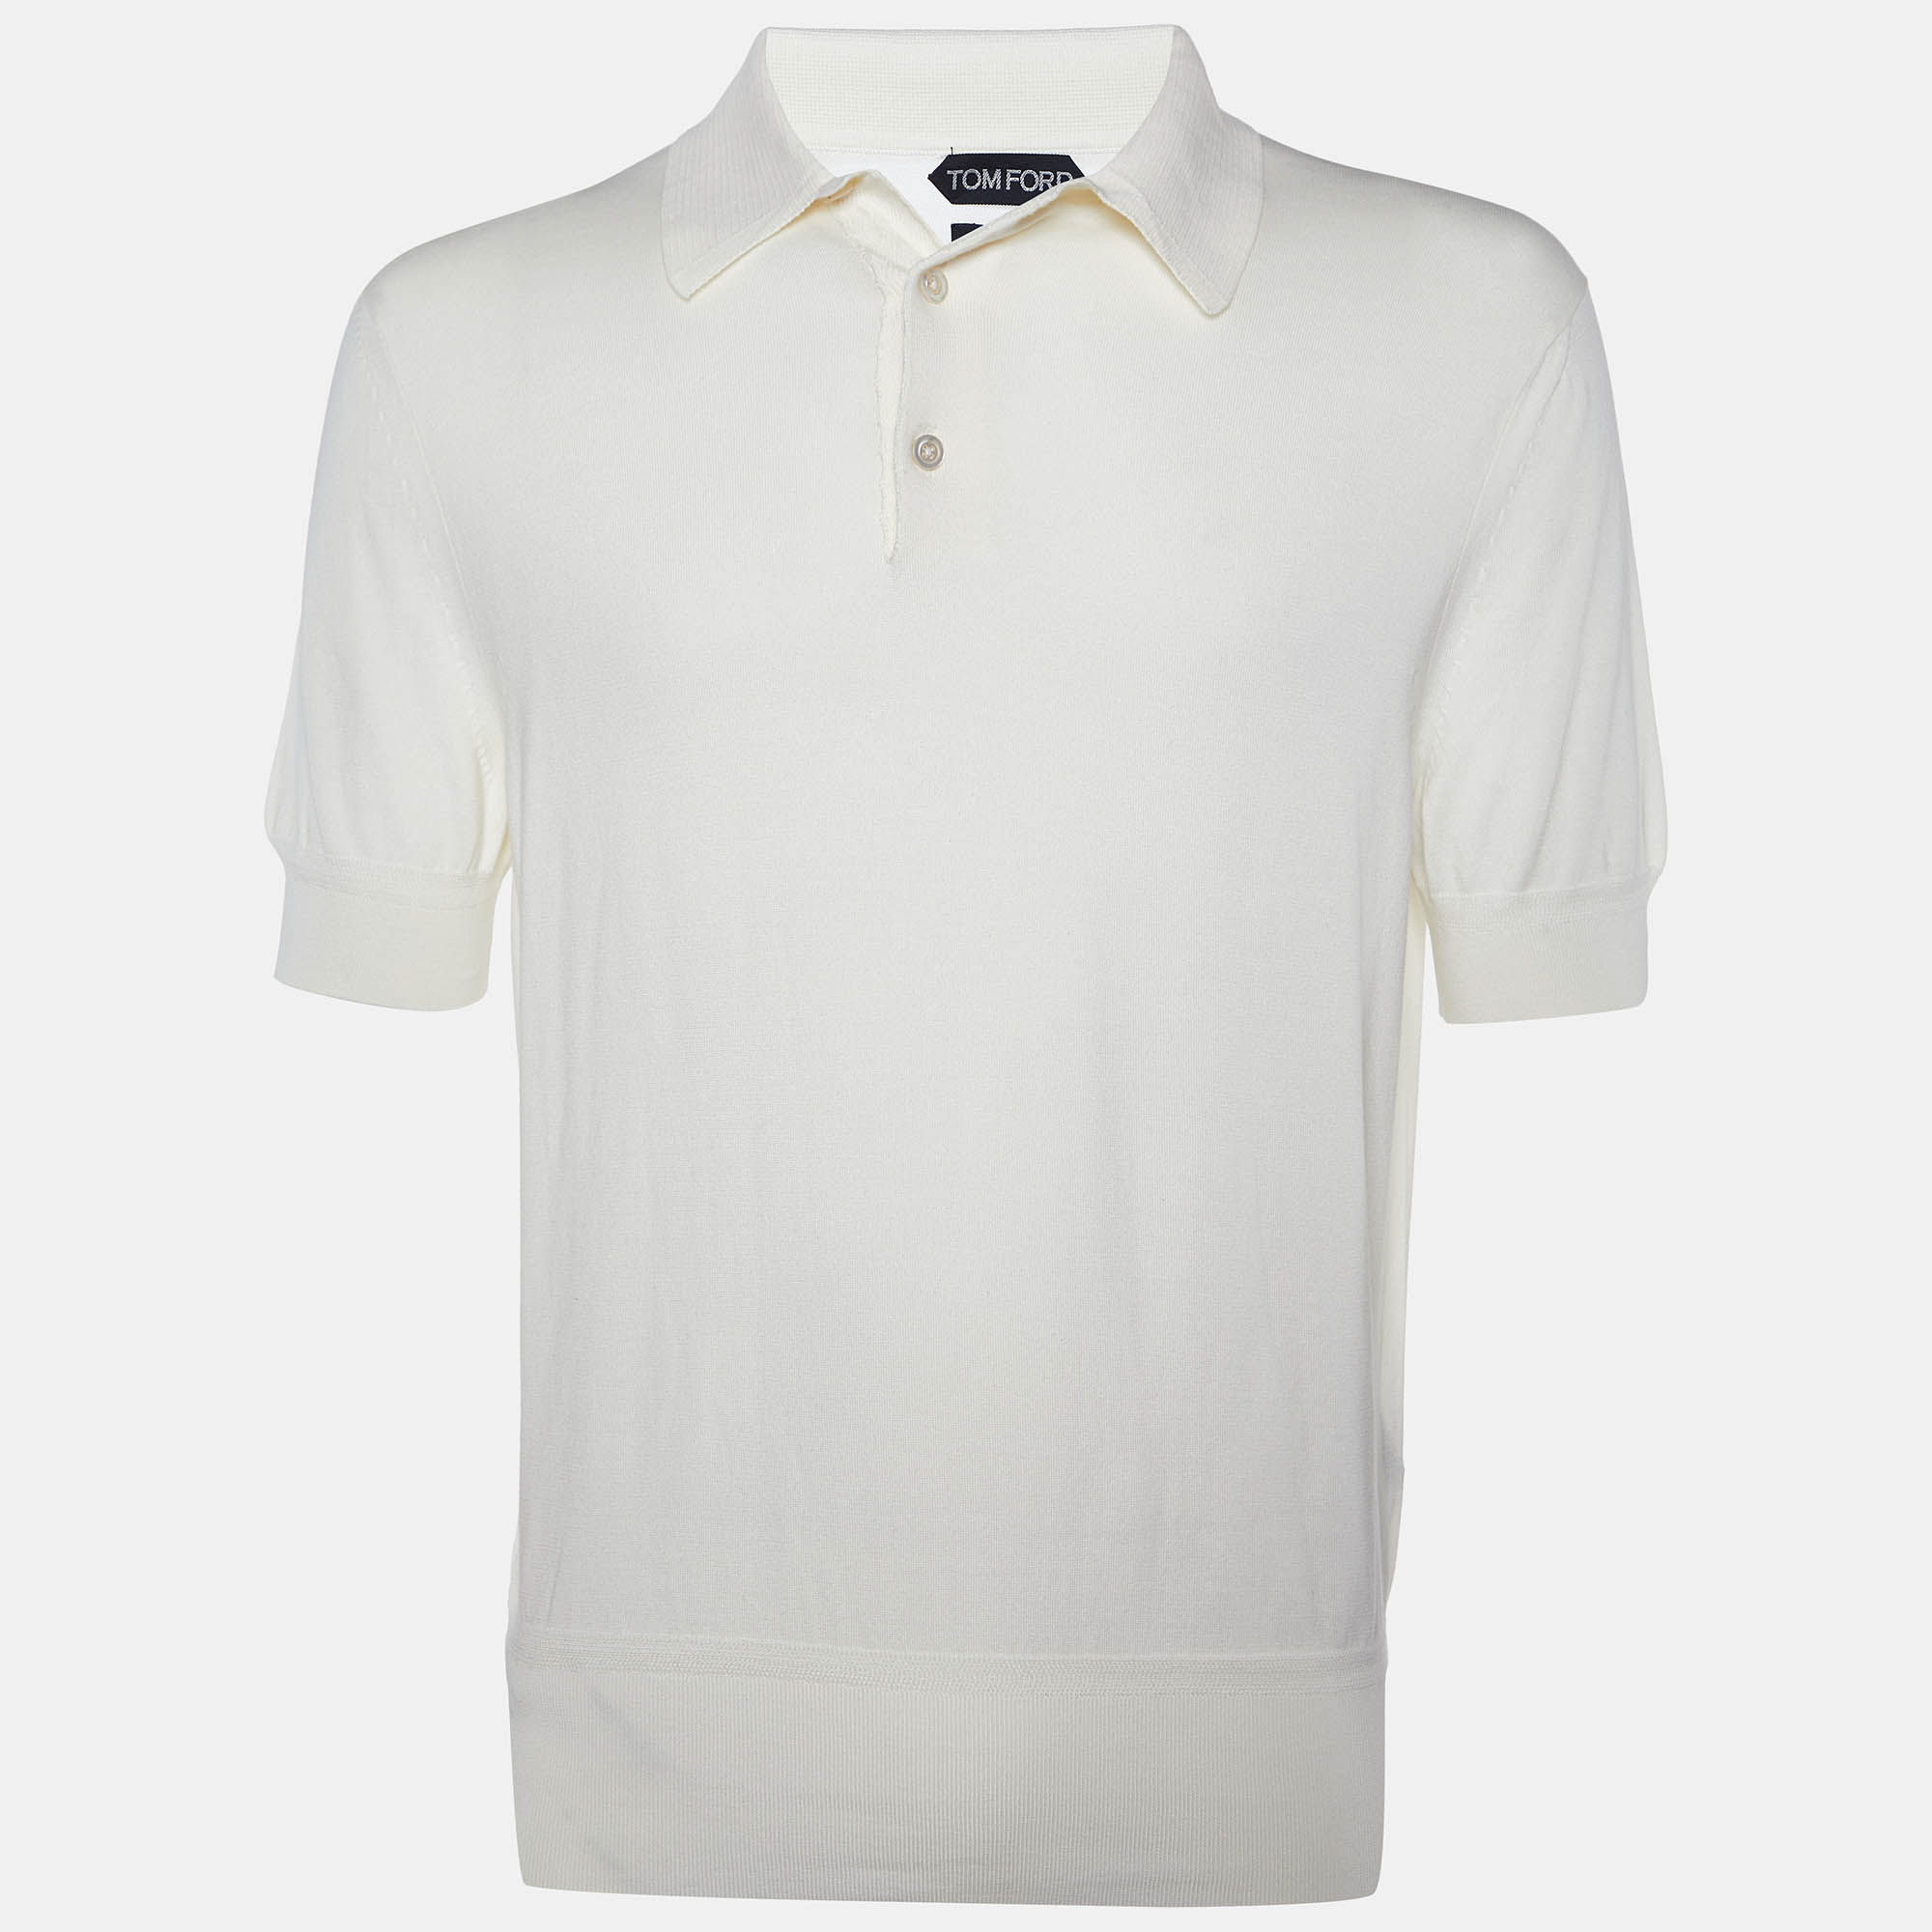 Pre-owned Tom Ford Cream Cotton Knit Polo T-shirt Xl